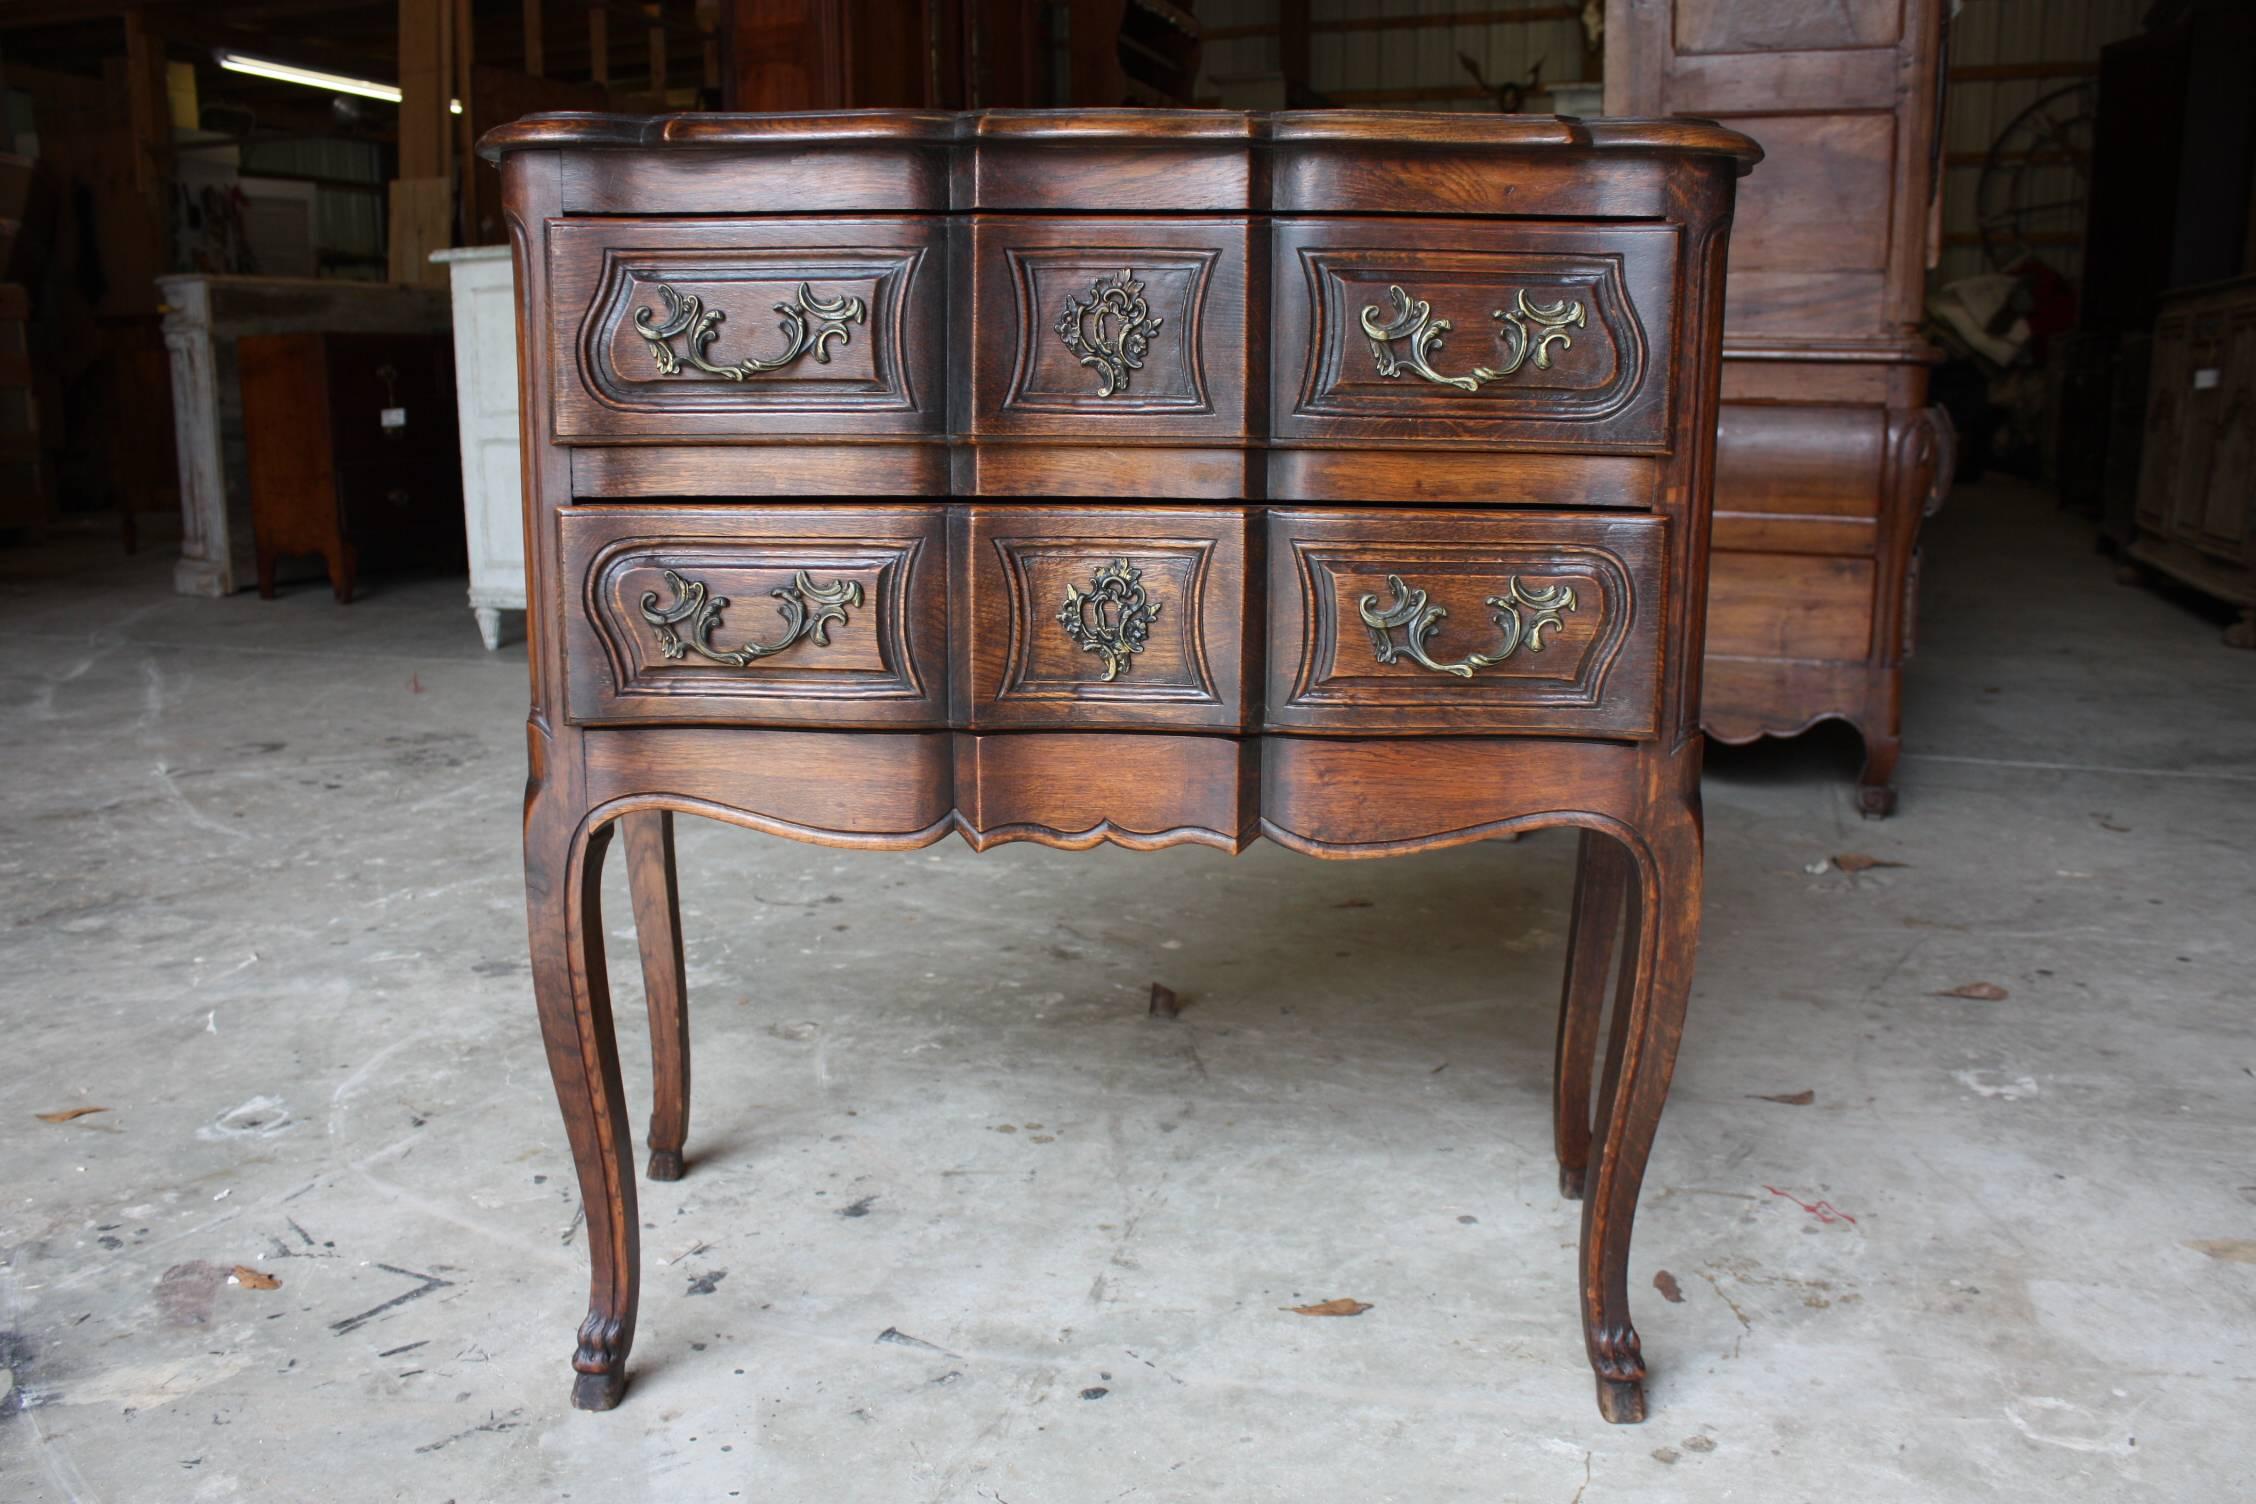 19th century French Louis XV walnut commode with two drawers. Would make a great nightstand or side table.